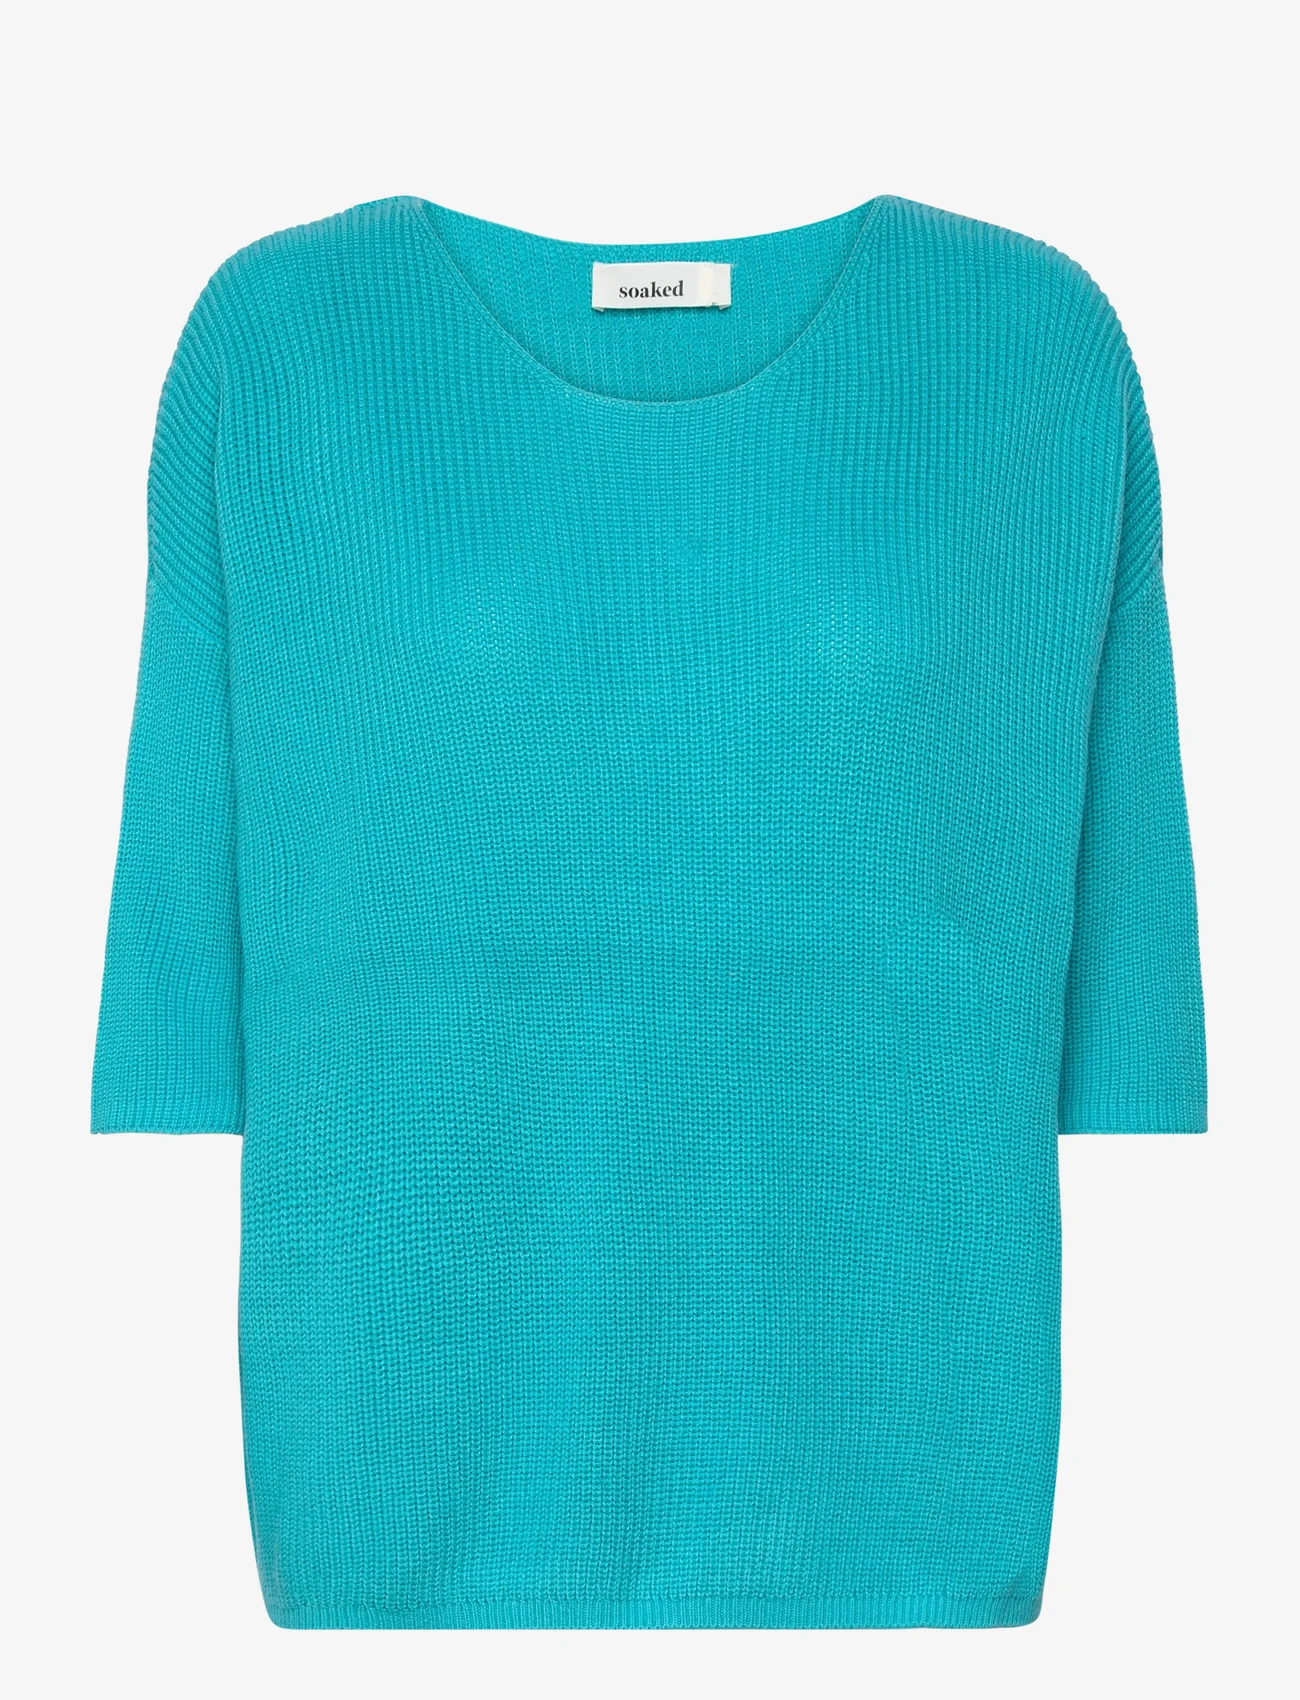 Soaked in Luxury - SLTuesday Cotton Jumper - jumpers - sea jet - 0